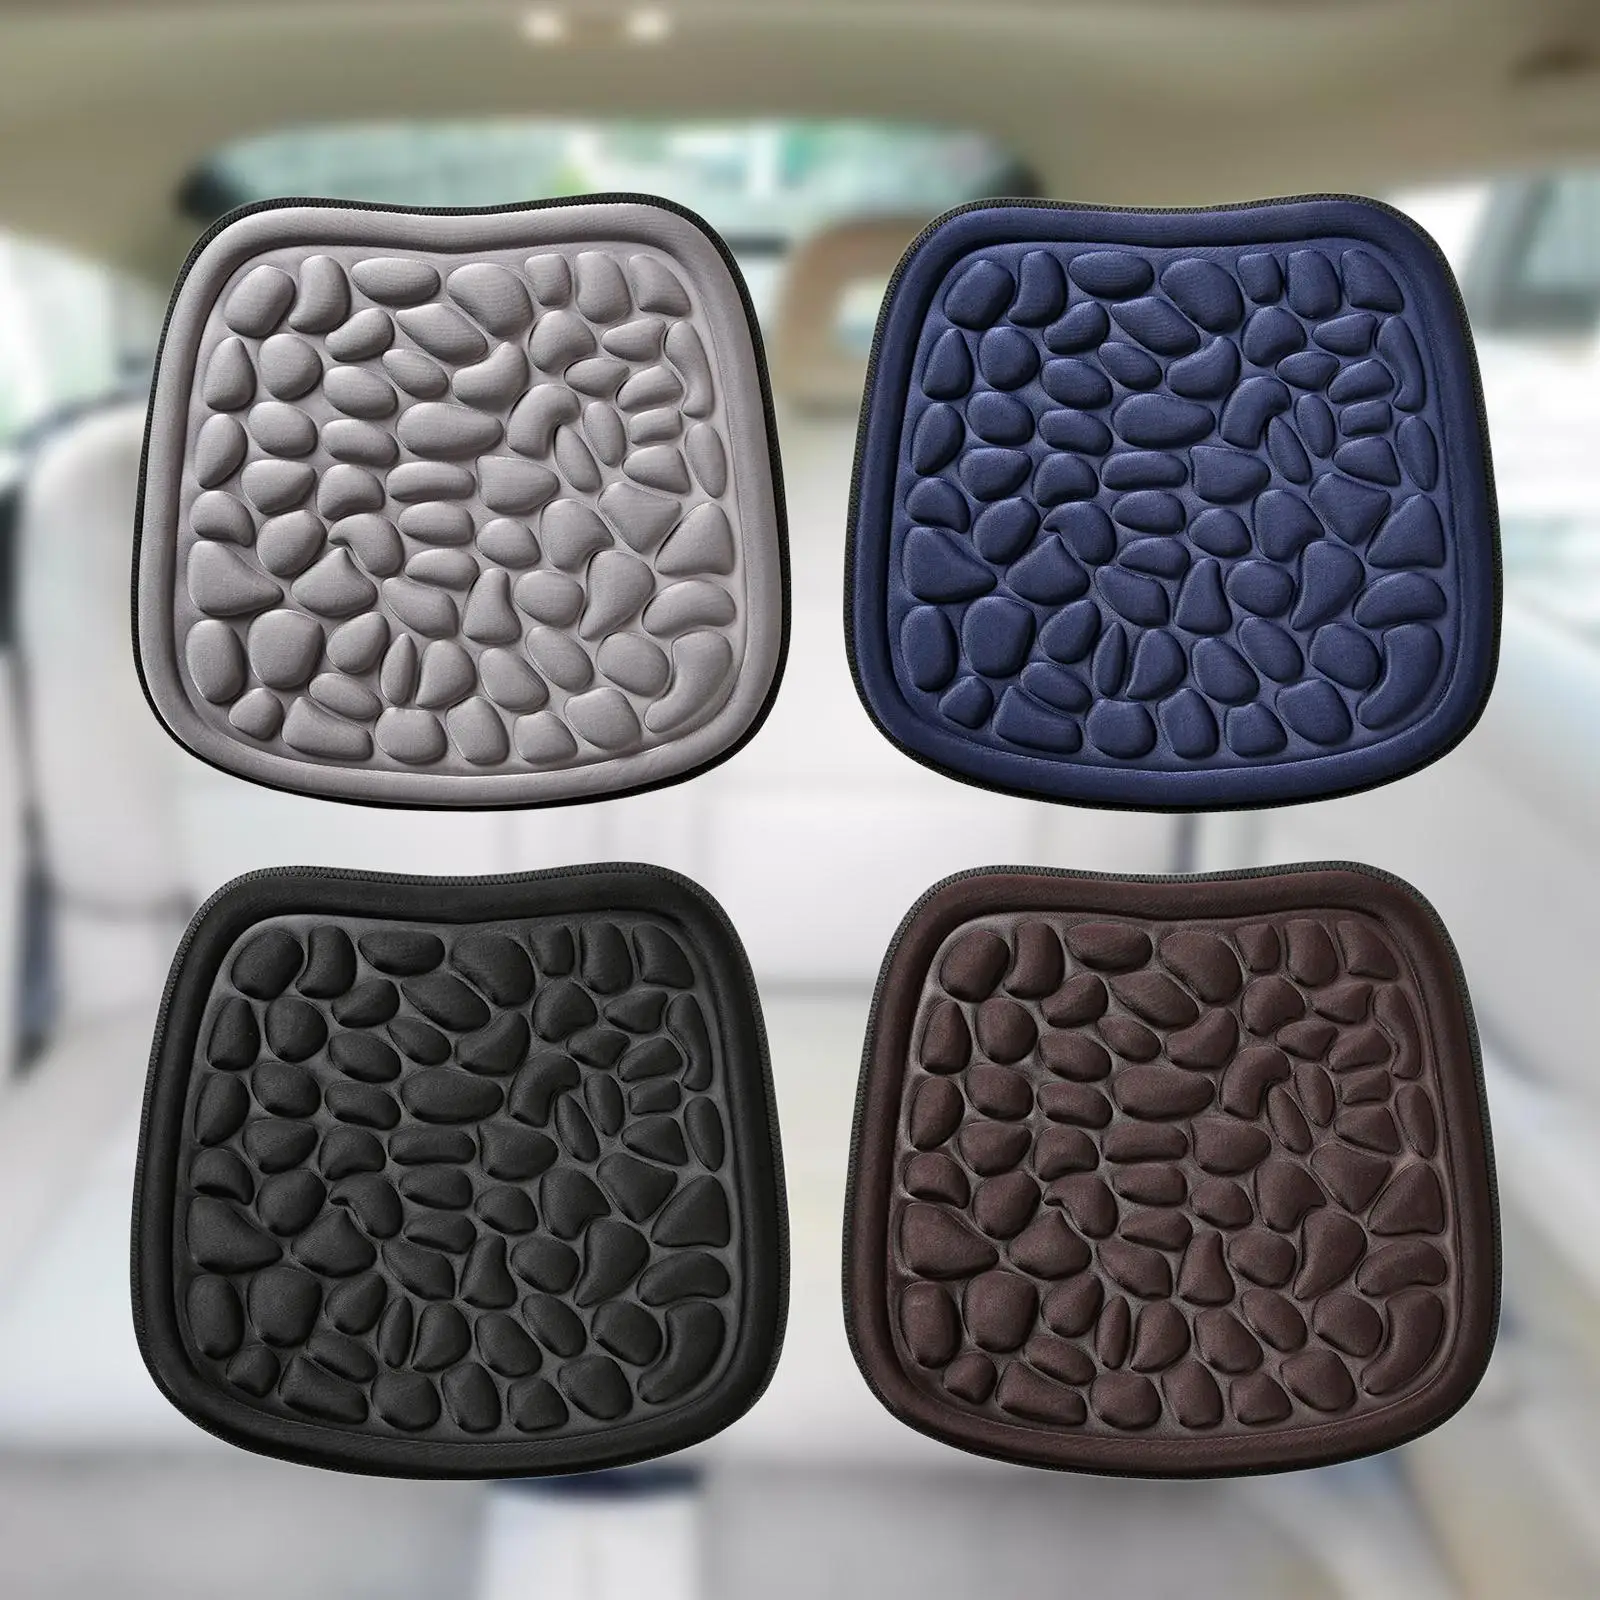 Car Seat Cushion Replaces Spare Parts Ventilation Non Slip Comfortable Auto Seat Cover Mat for Most Vehicles Truck Car SUV